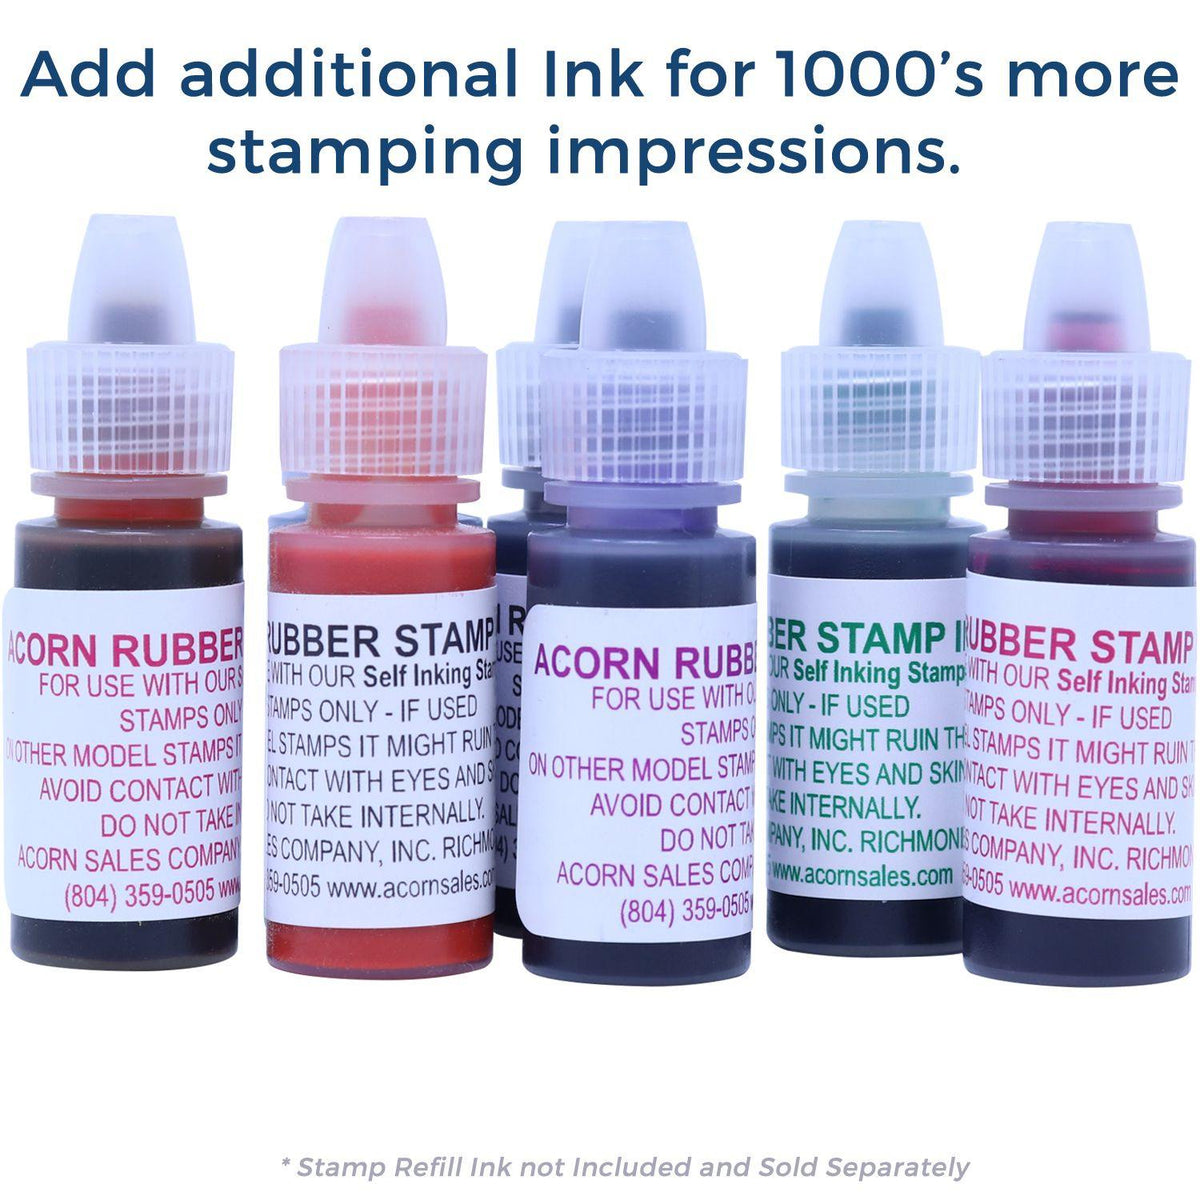 Refill Inks for Slim Pre-Inked Fax Memo Stamp Available